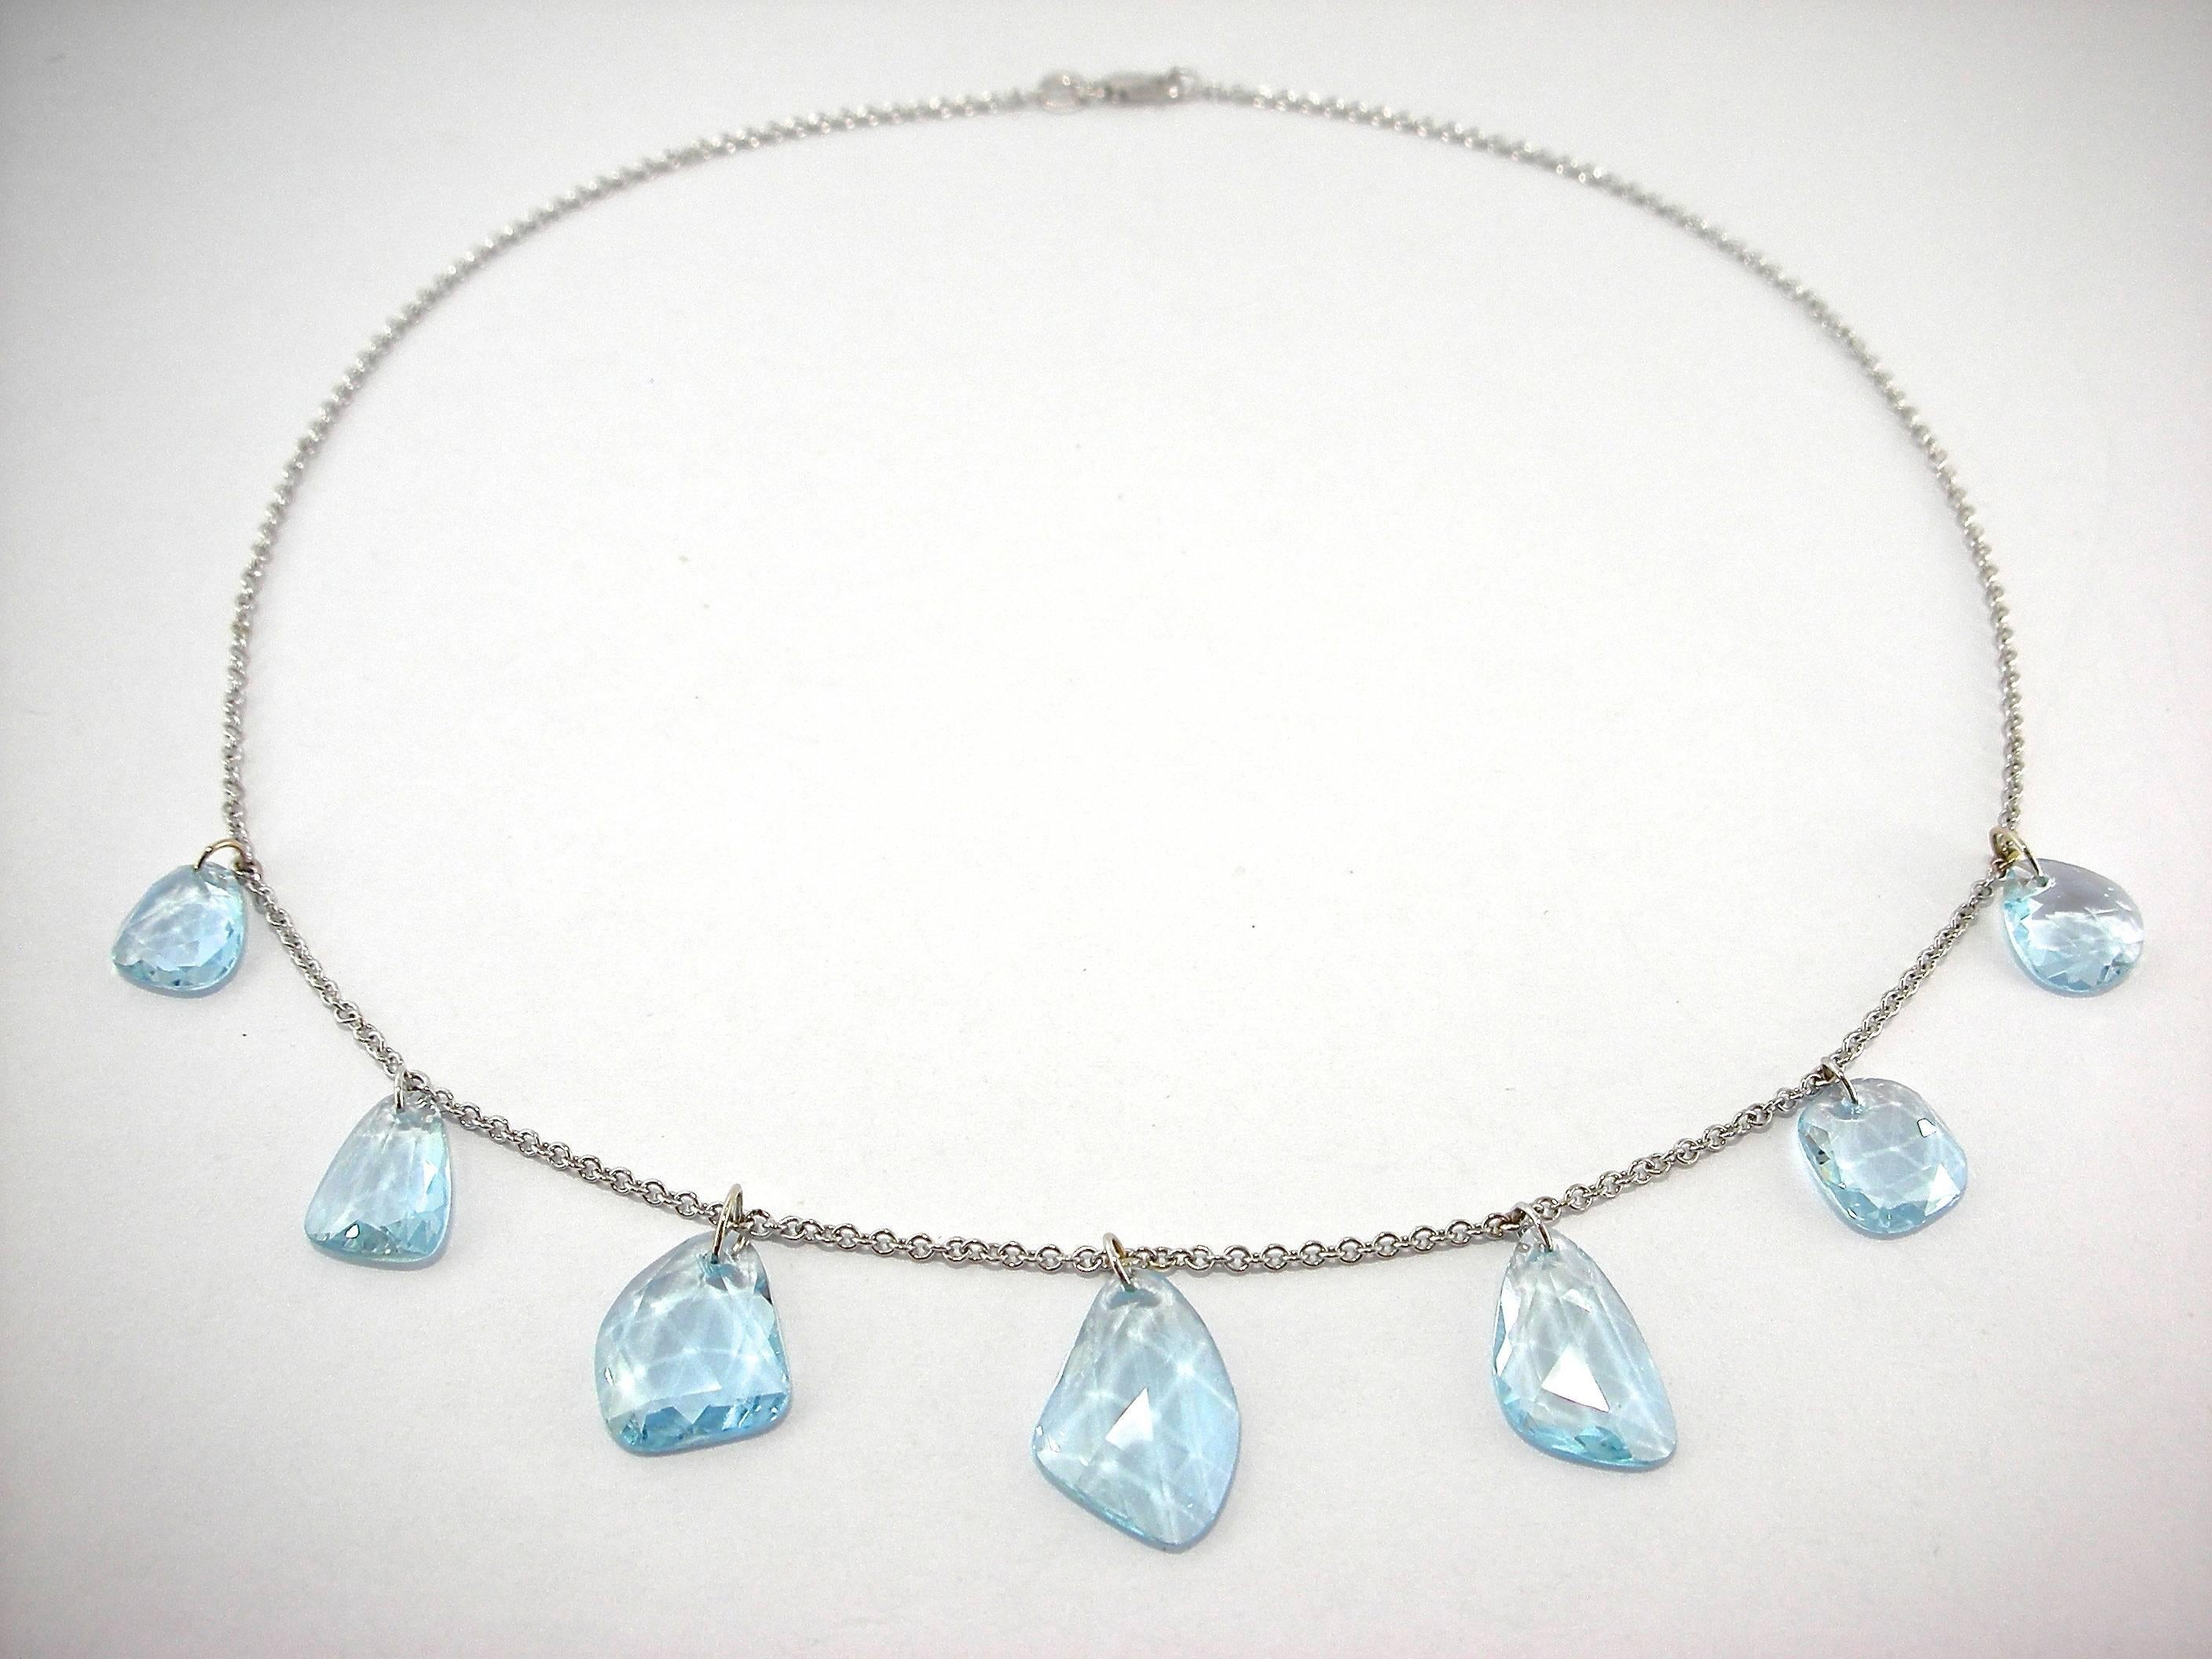 Jona design collection, hand crafted in Italy, 18 karat white gold drop necklace, featuring 26.20 carats of aquamarine flat cut pebbles.
All Jona jewelry is new and has never been previously owned or worn. Each item will arrive at your door